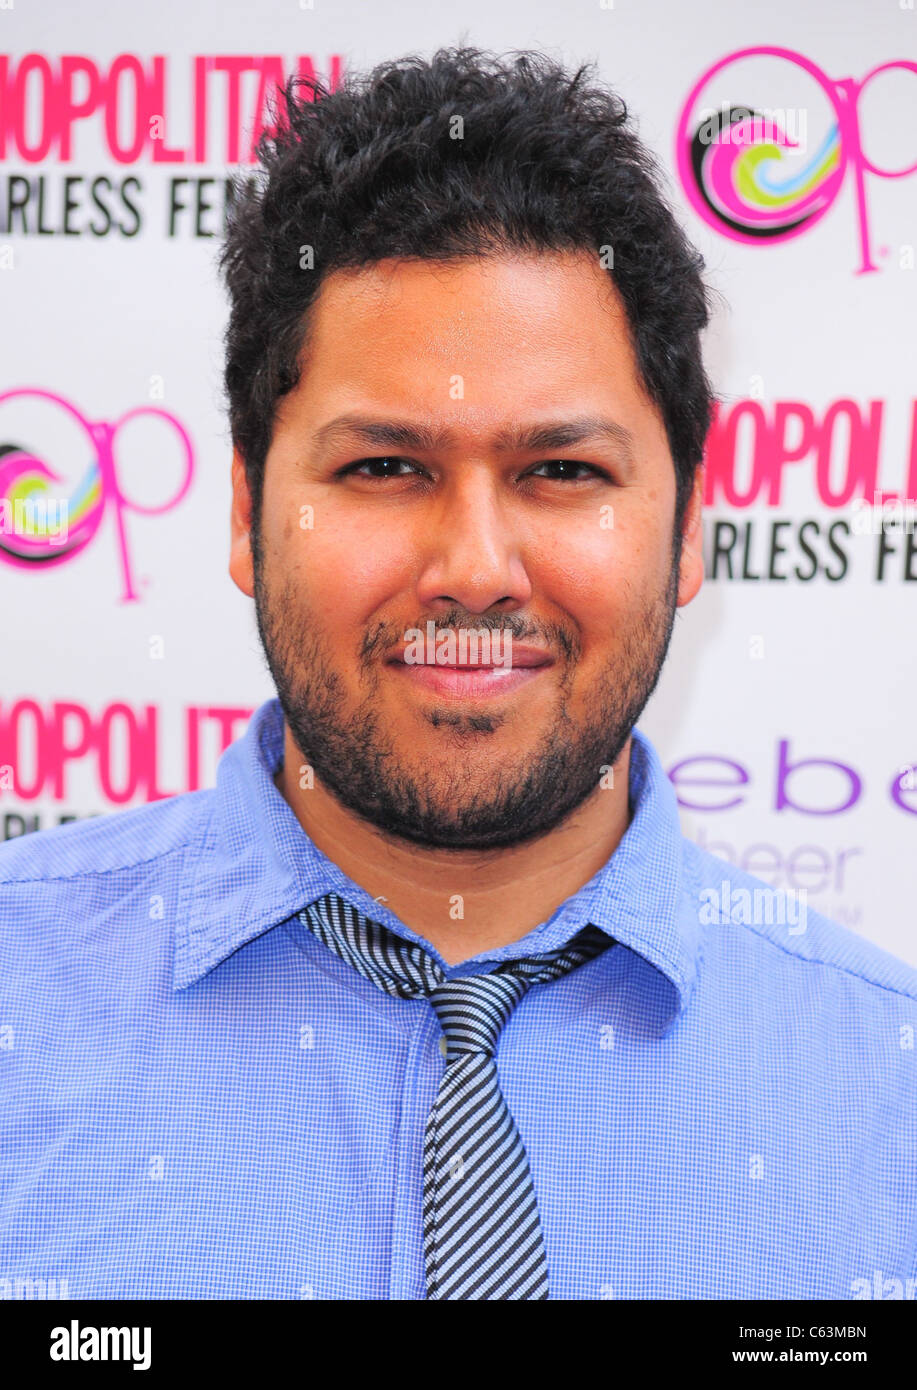 Dileep Rao in attendance for Cosmpolitan Magazine's Summer Friday, The Yard at SoHo Grand, New York, NY August 6, 2010. Photo By: Gregorio T. Binuya/Everett Collection Stock Photo